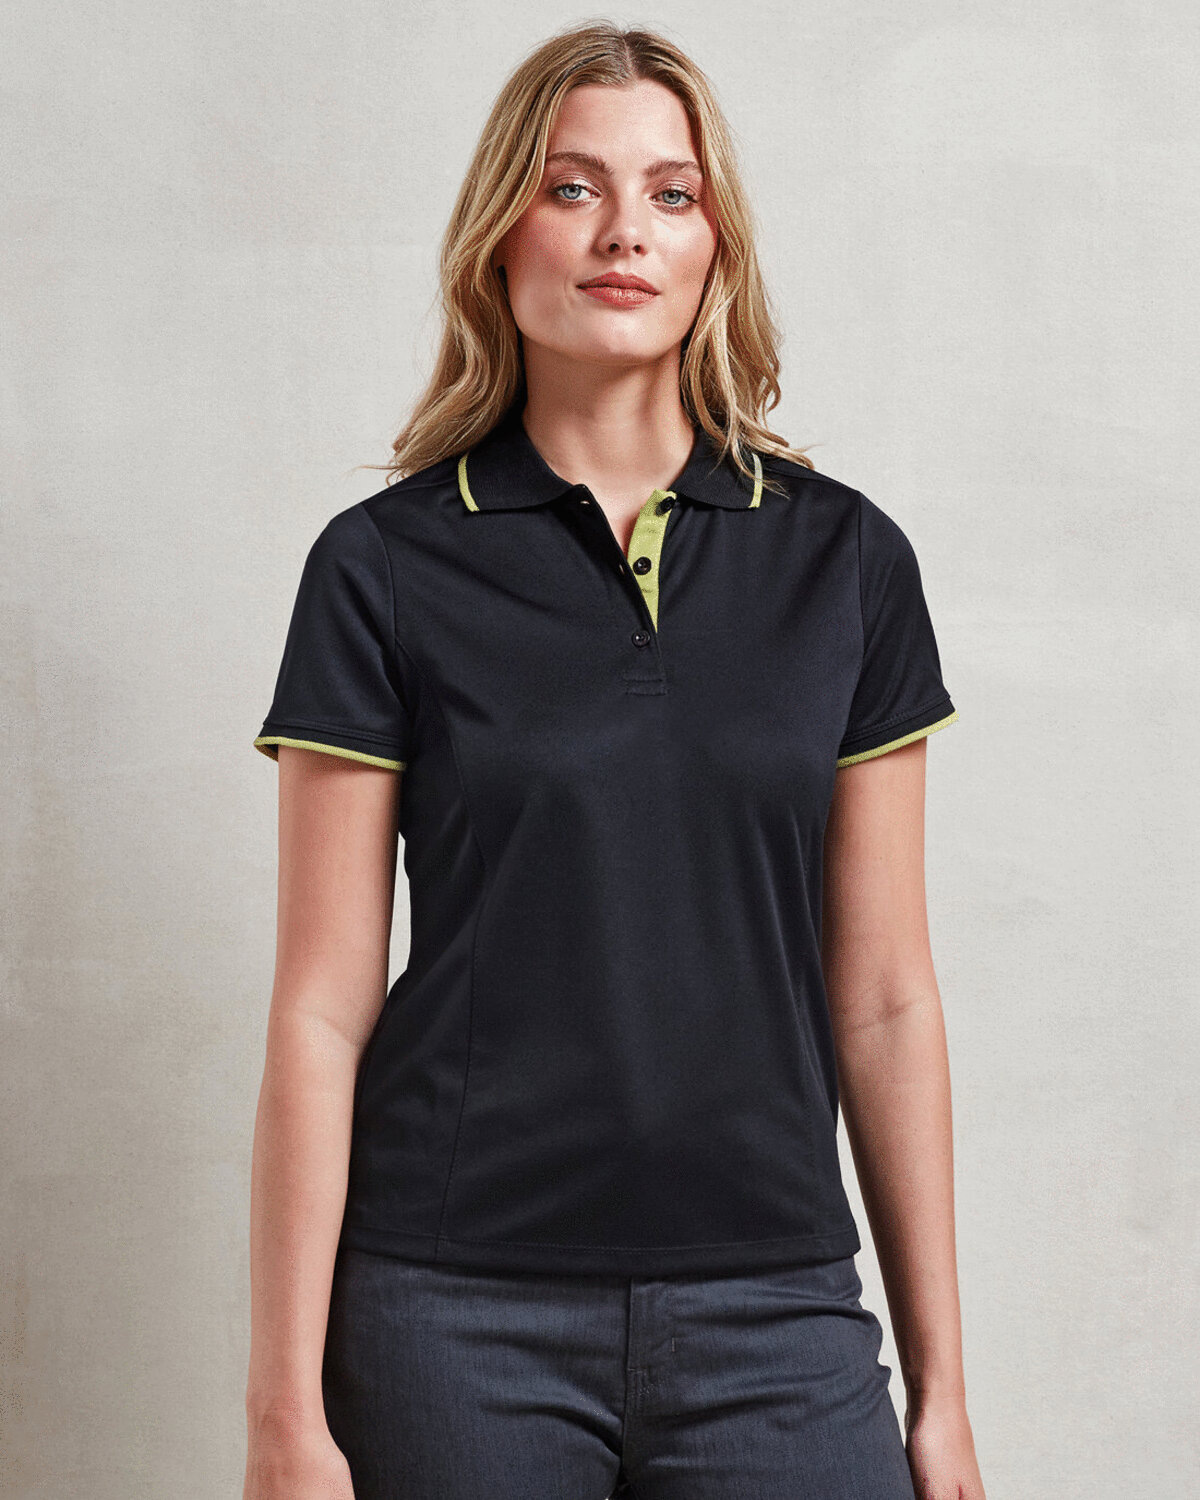 LADIES CONTRAST TIPPED COOLCHECKER POLO SHIRT